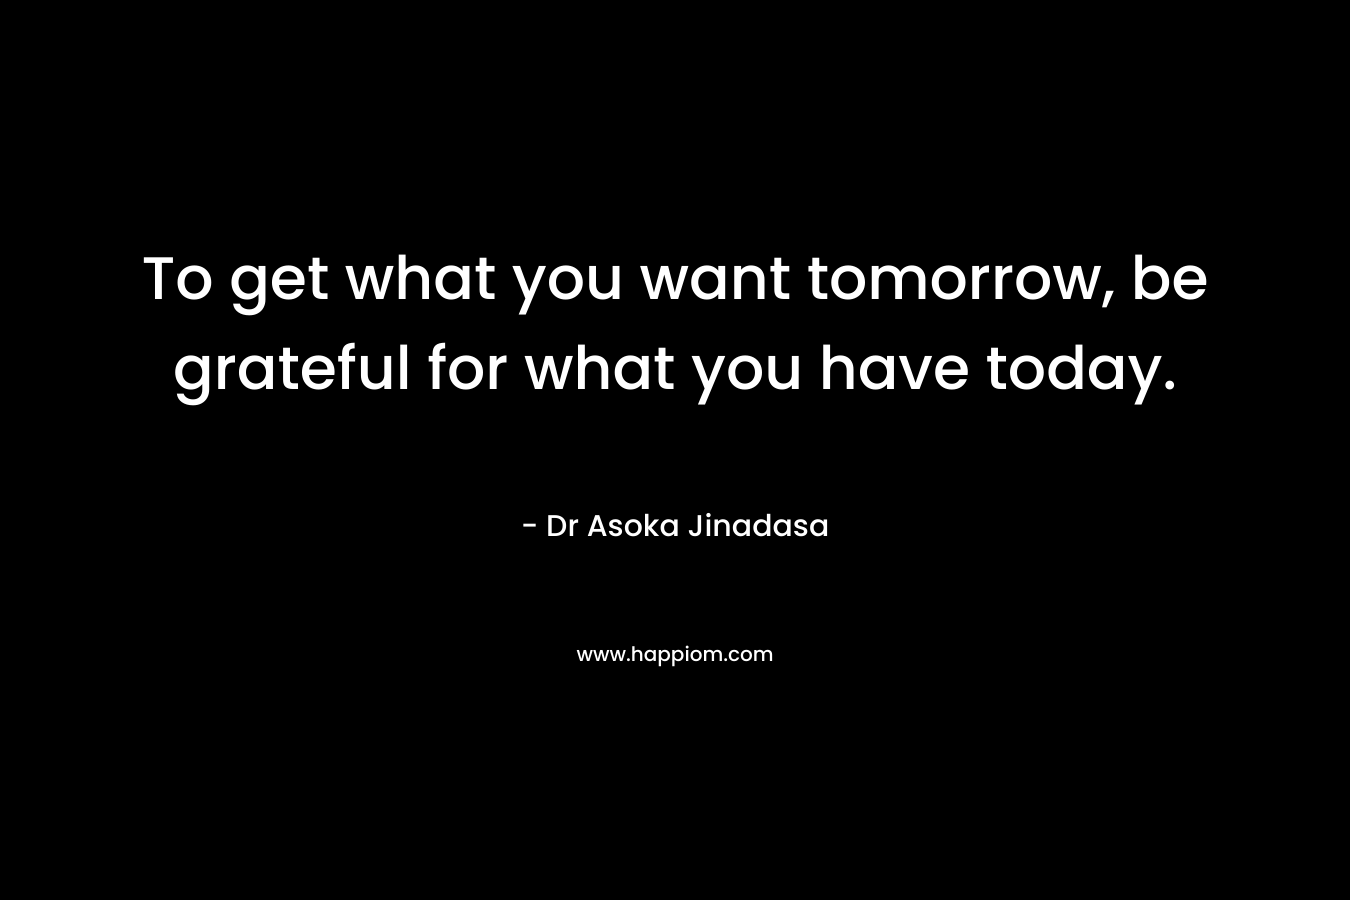 To get what you want tomorrow, be grateful for what you have today.